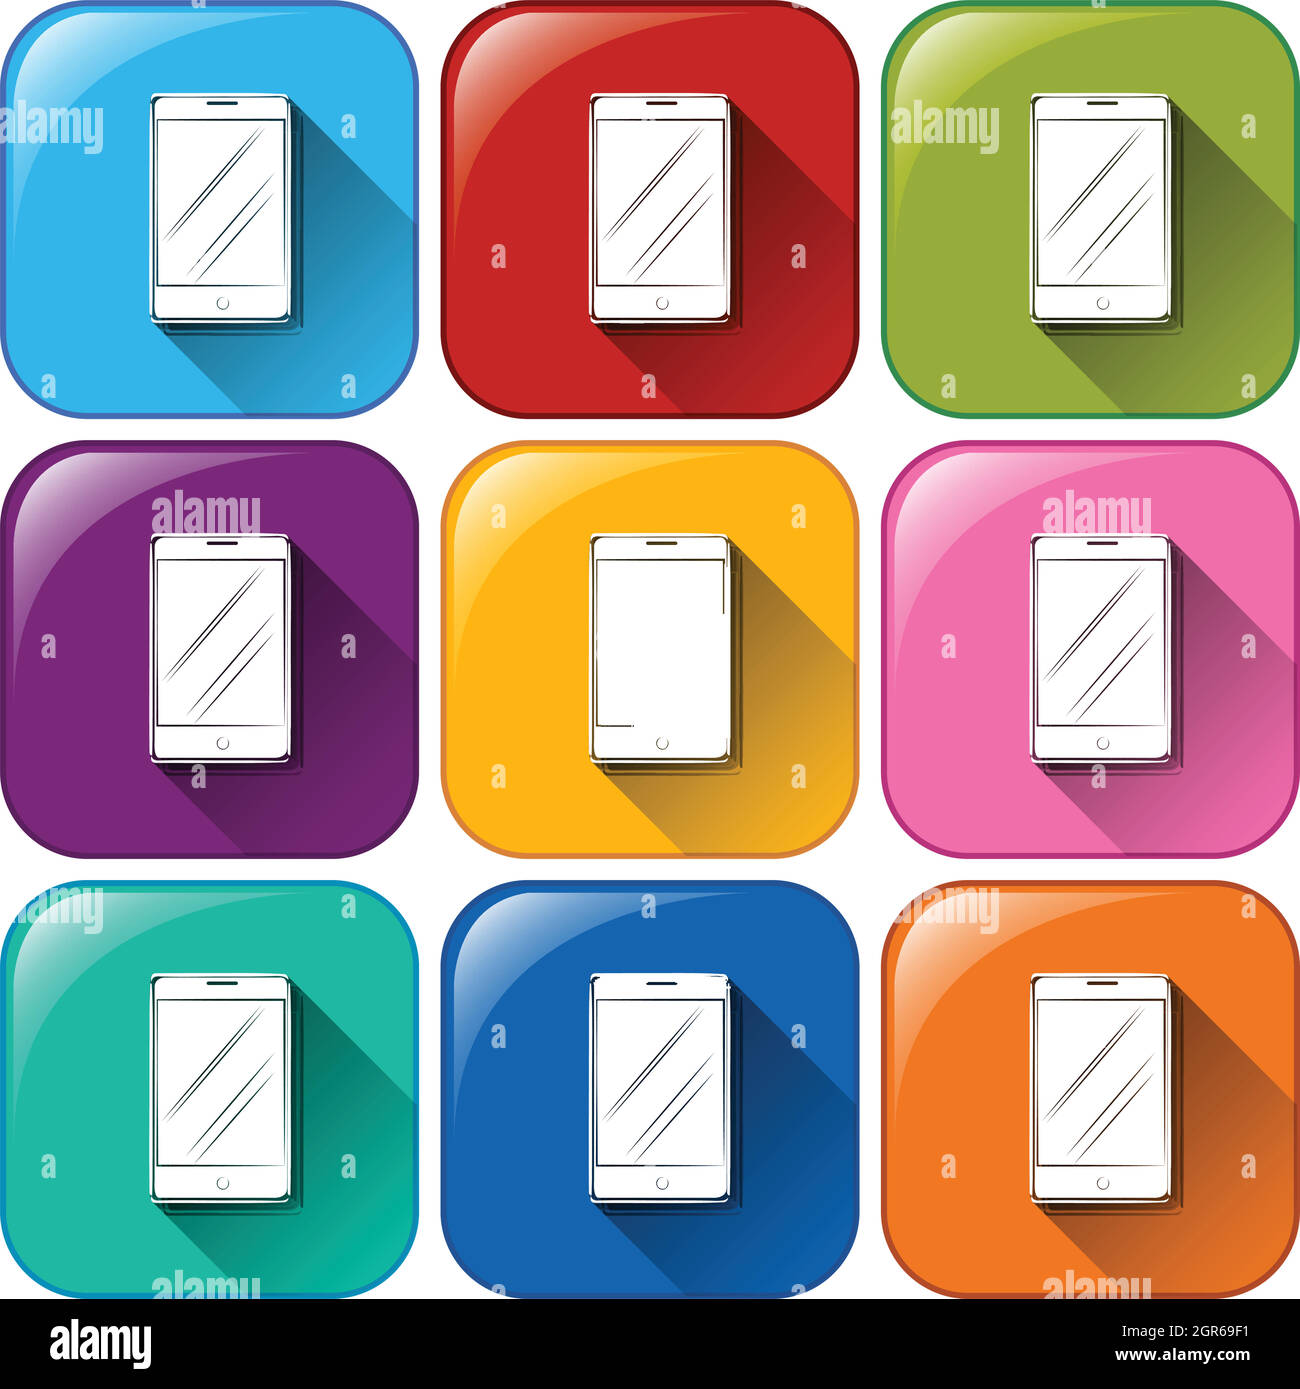 Cellular phone icons Stock Vector